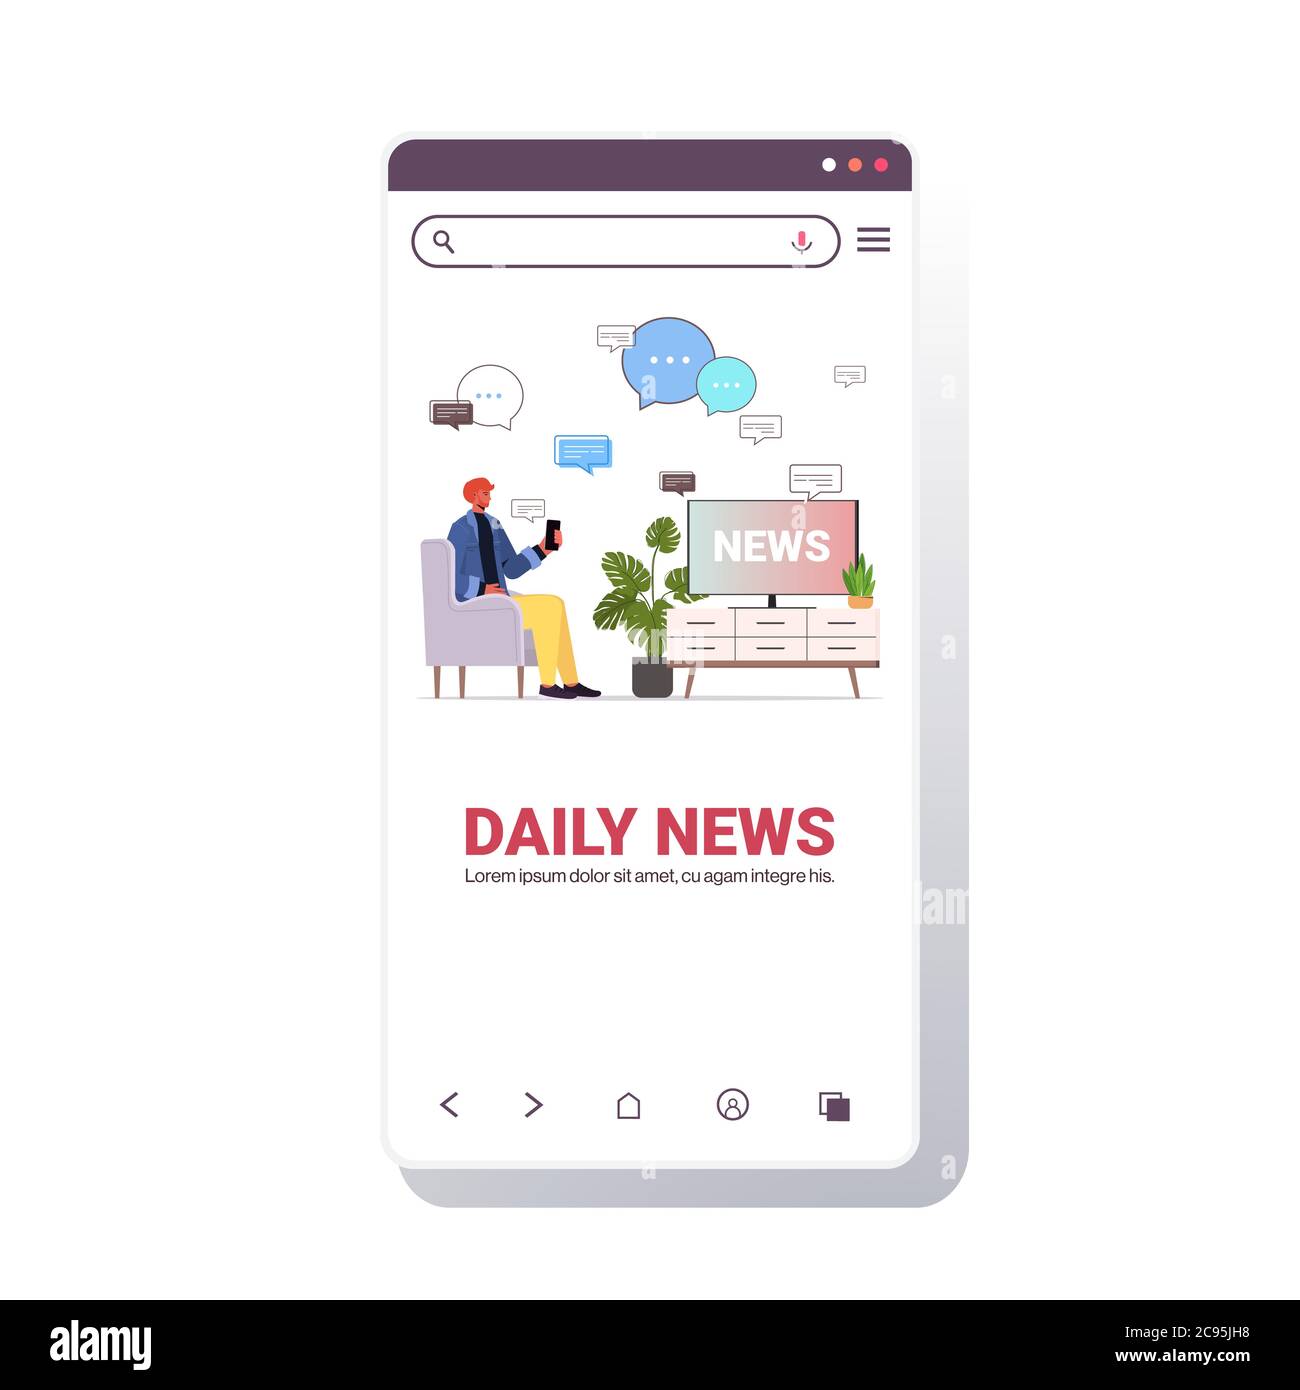 man watching tv and discussing daily news in mobile chatting app chat bubble communication concept smartphone screen mobile app portrait copy space vector illustration Stock Vector